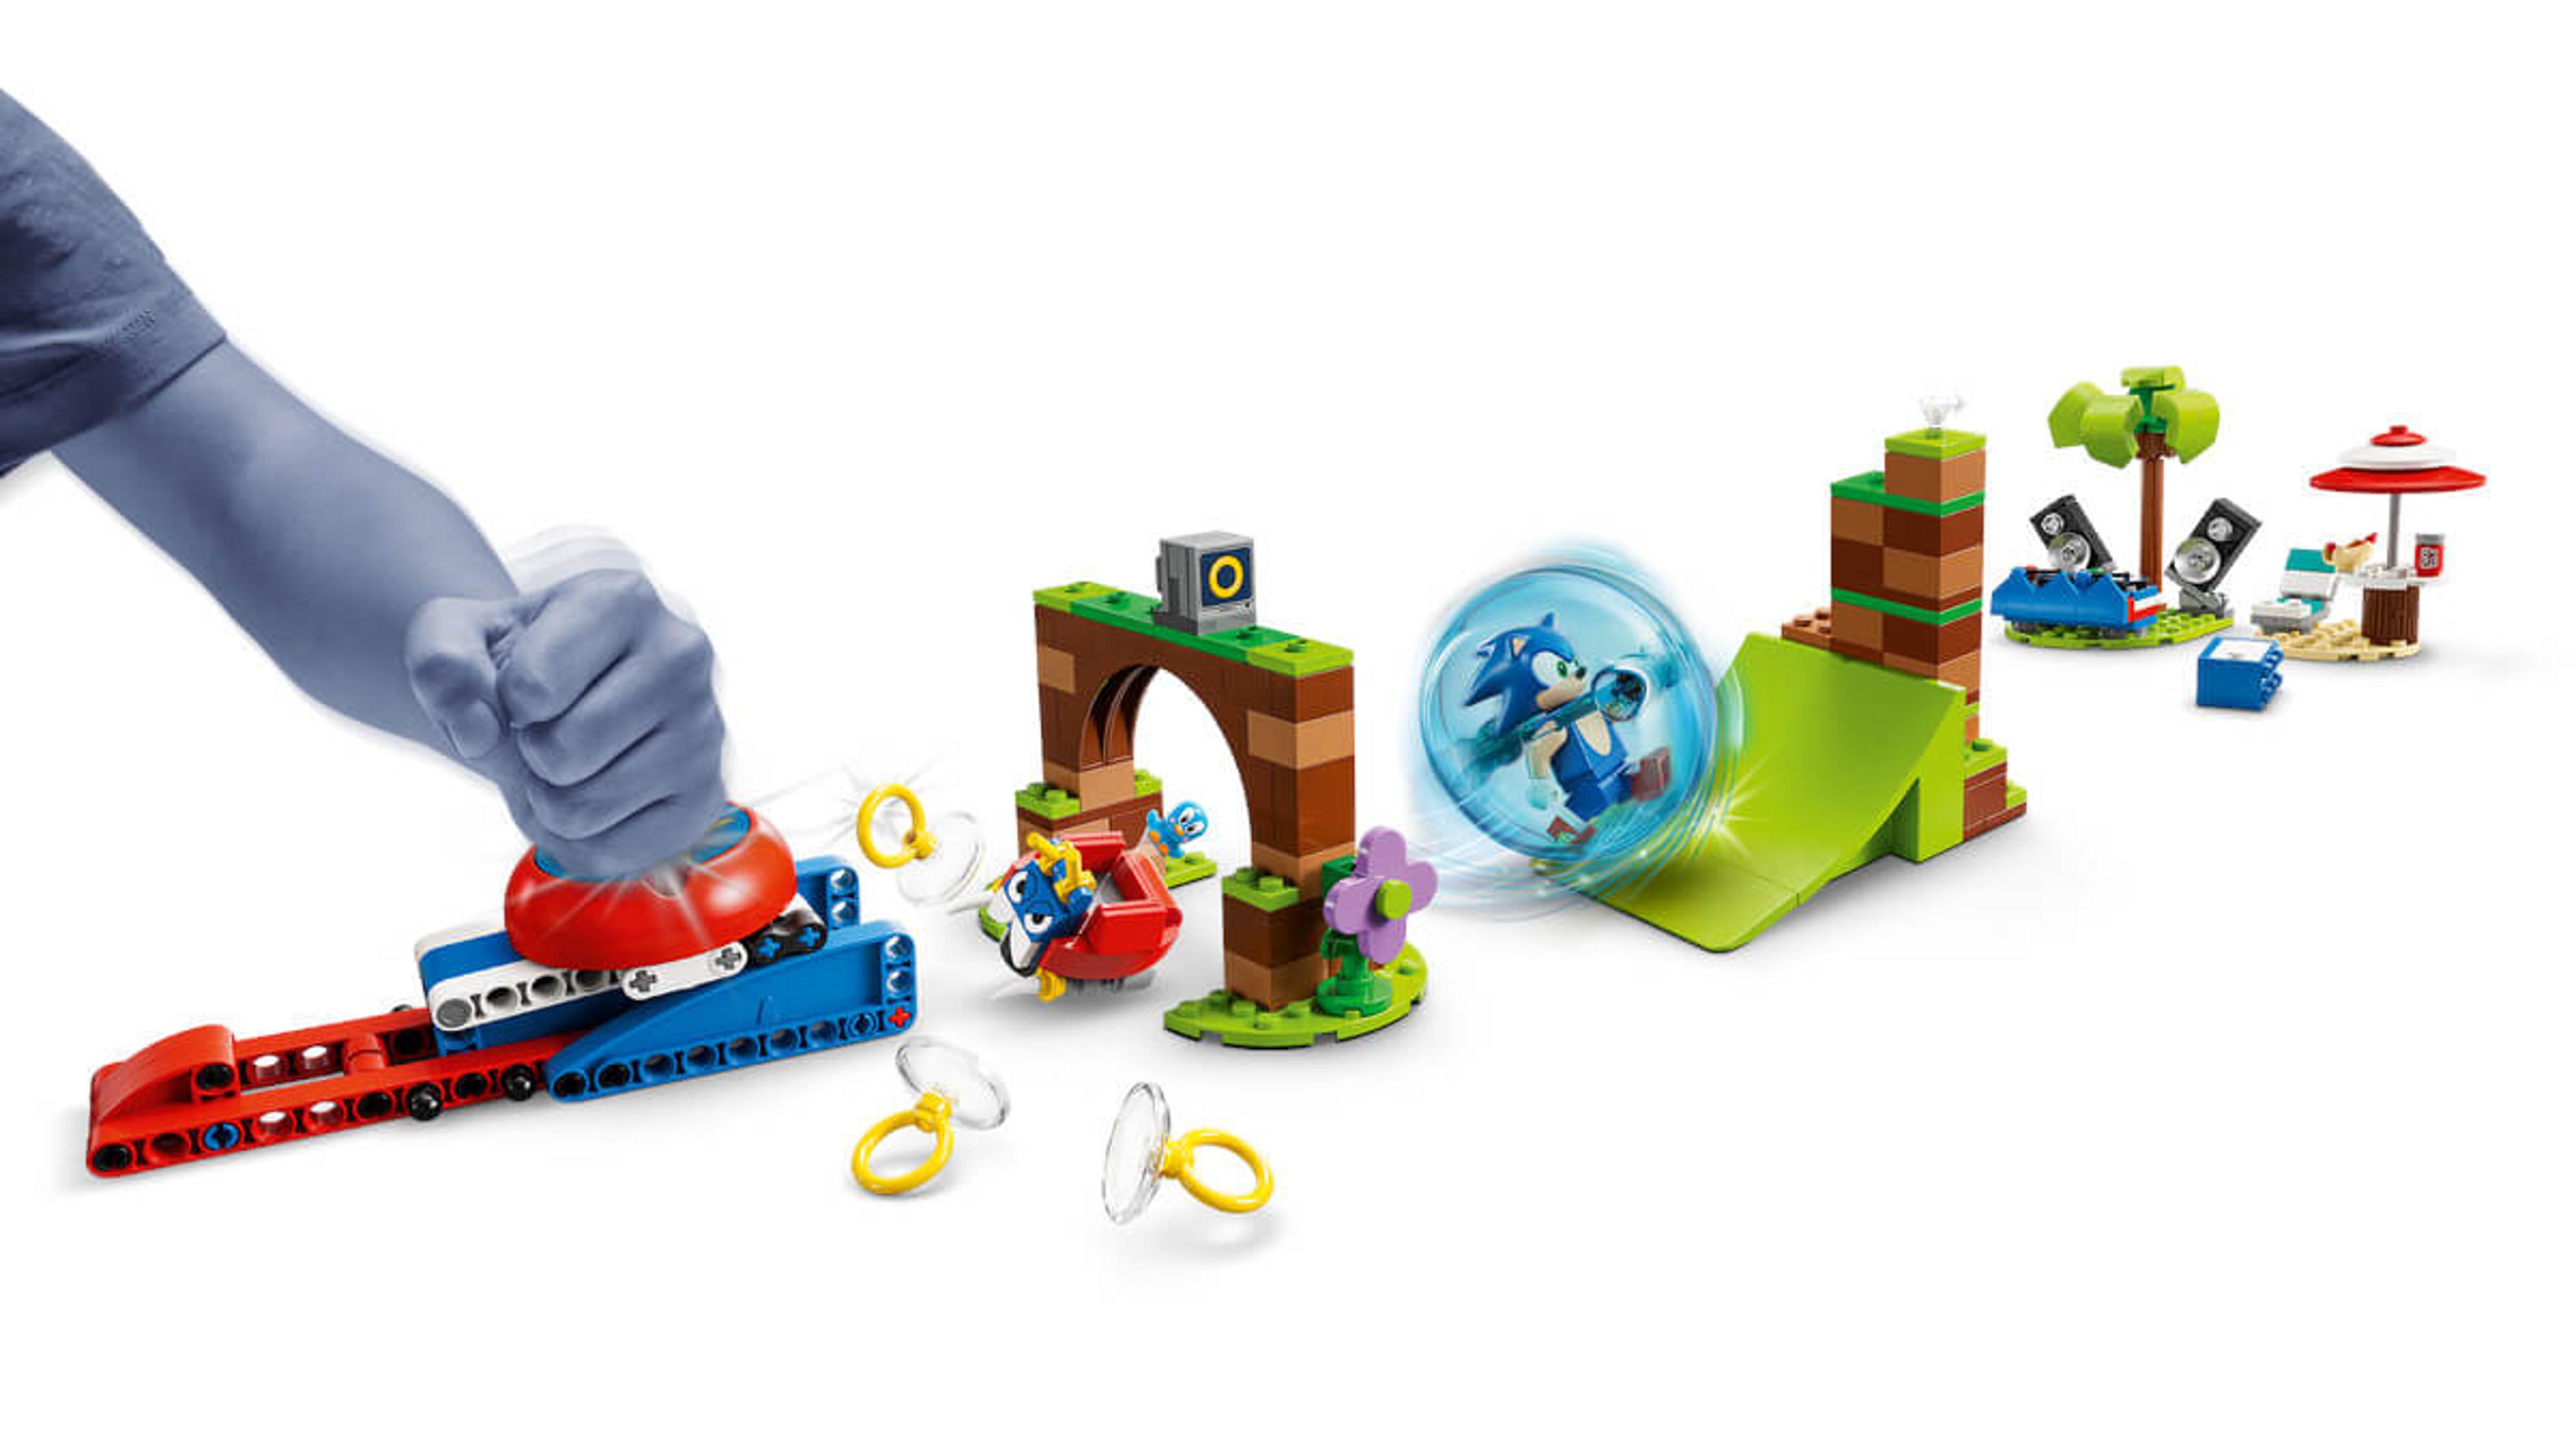 LEGO Sonic the Hedgehog Sonic's Speed Sphere Challenge 76990 Building Toy  Set, Sonic Playset with Speed Sphere Launcher and 3 Sonic Figures, Fun  Christmas Gift Idea for Young Fans Ages 6 and